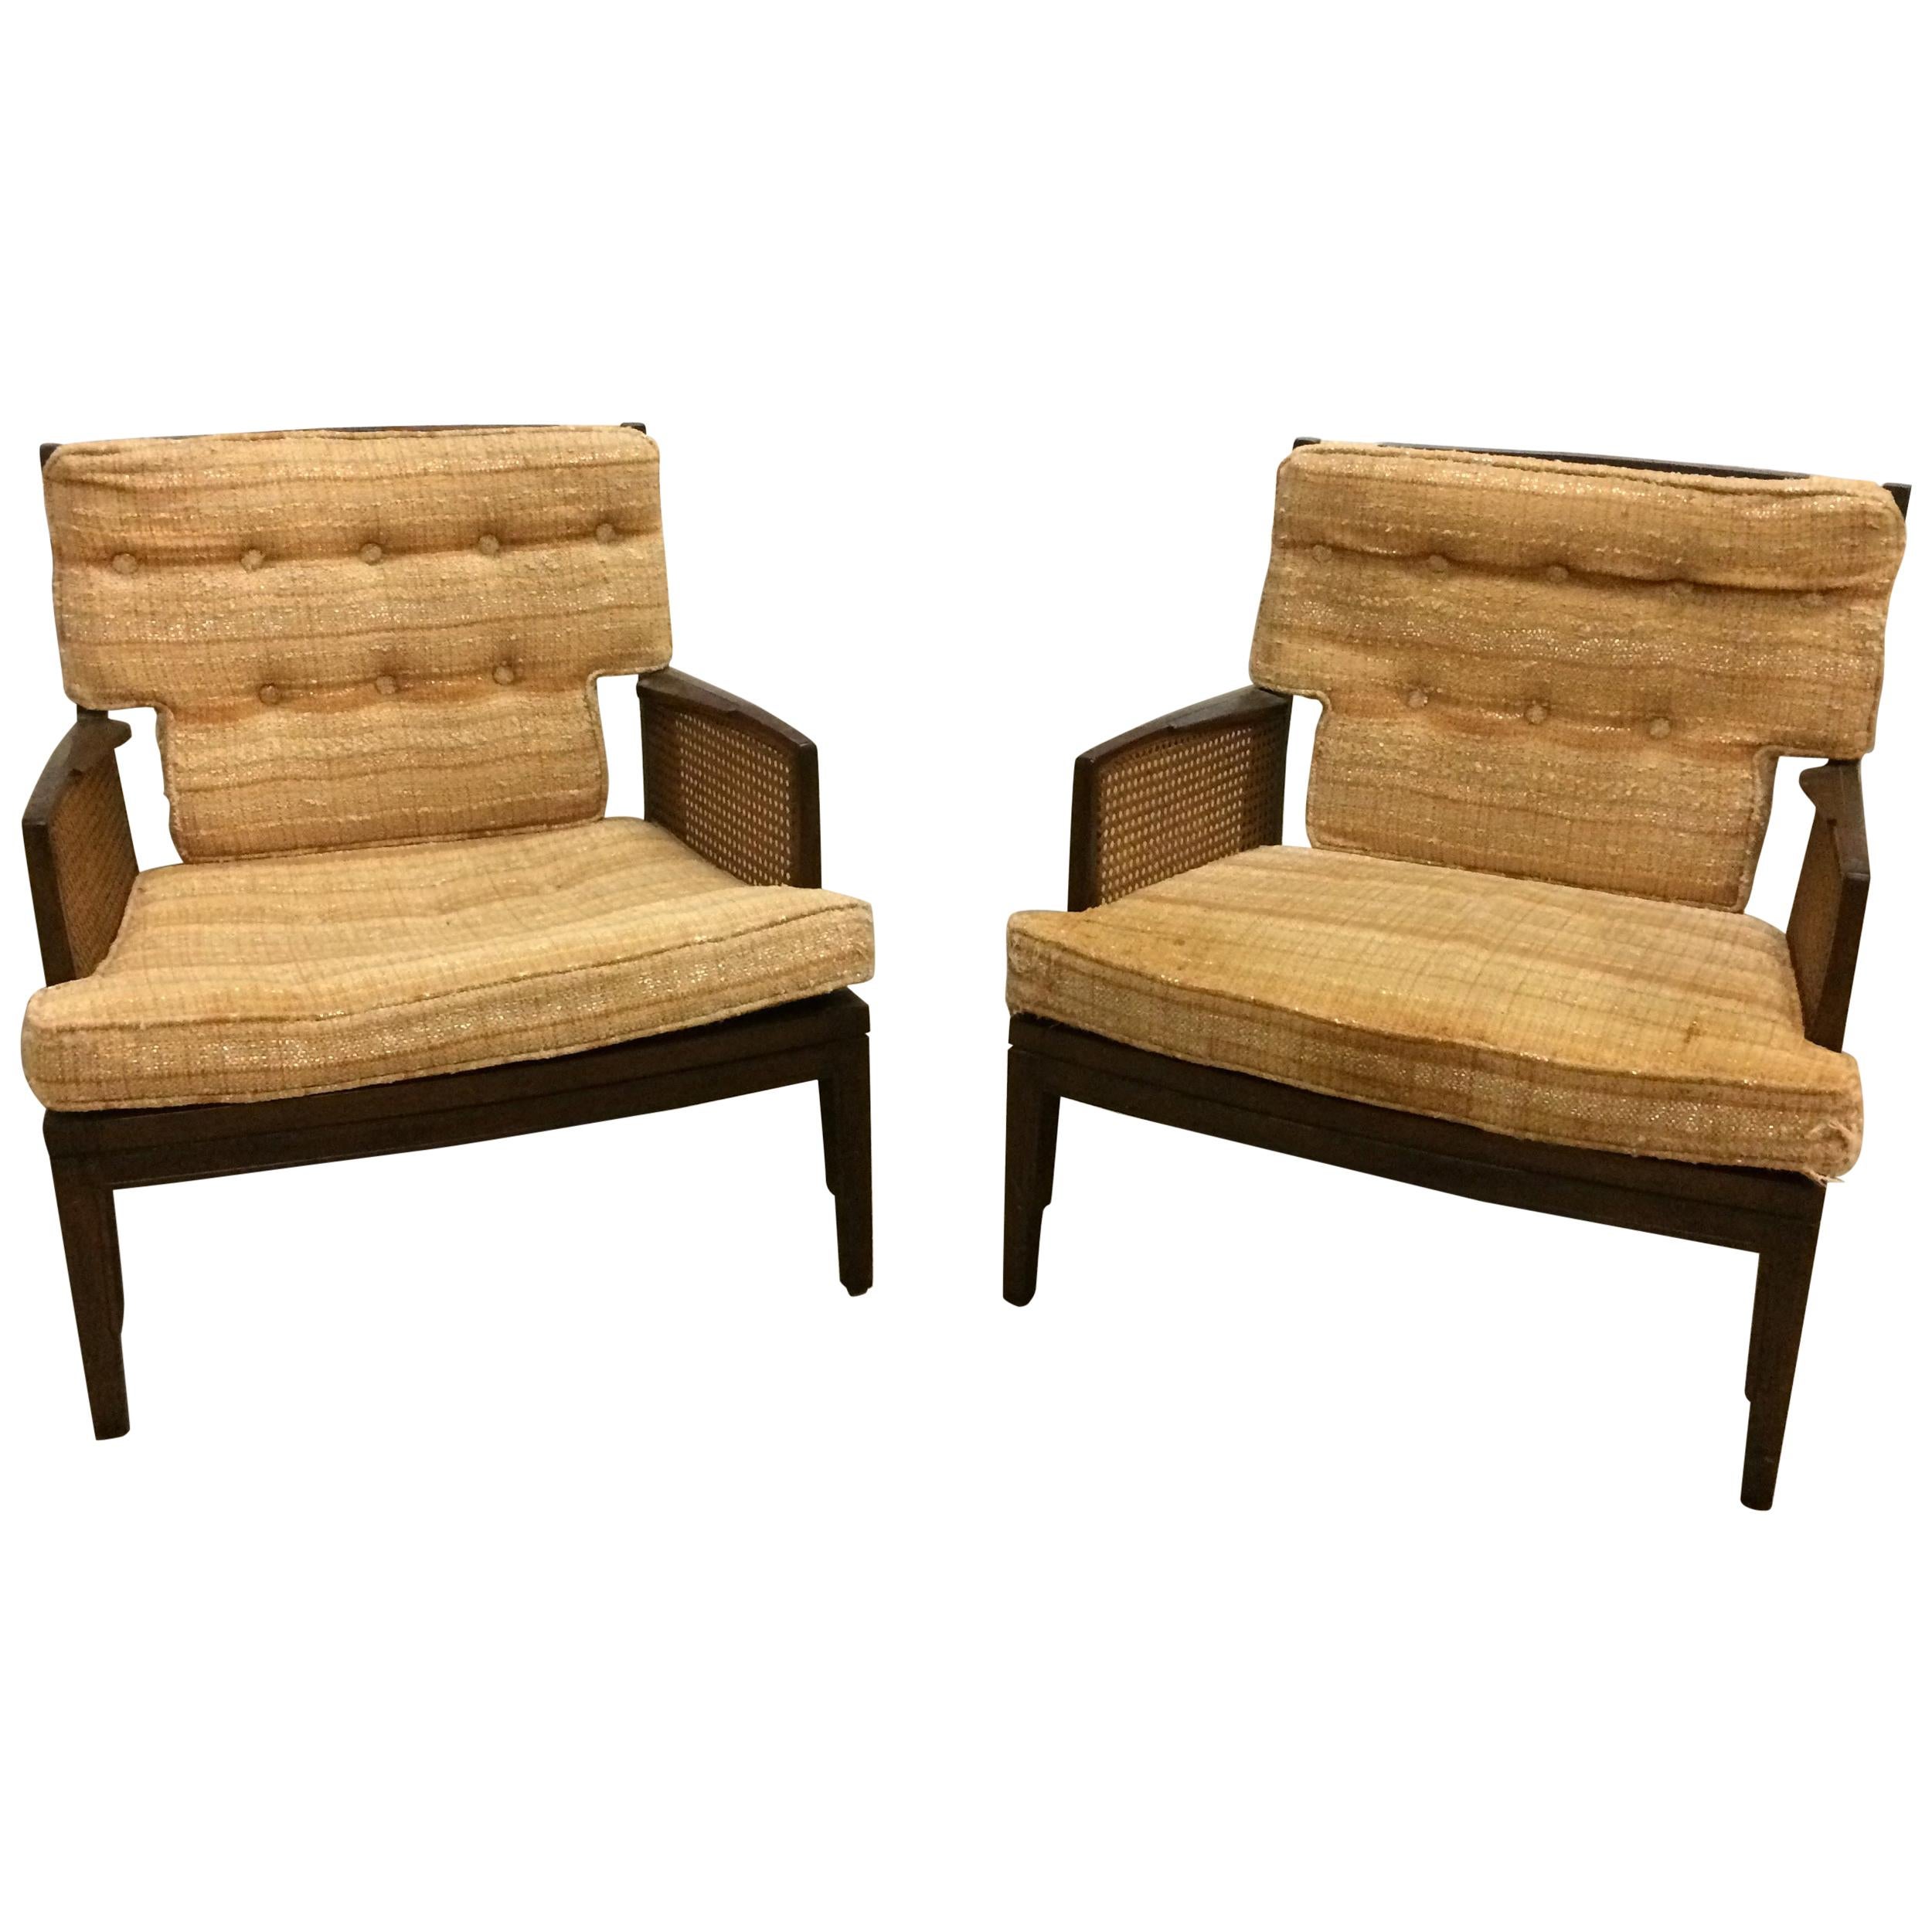 Pair of Vintage Baker Cane and Mahogany Lounge Chairs, 1960s